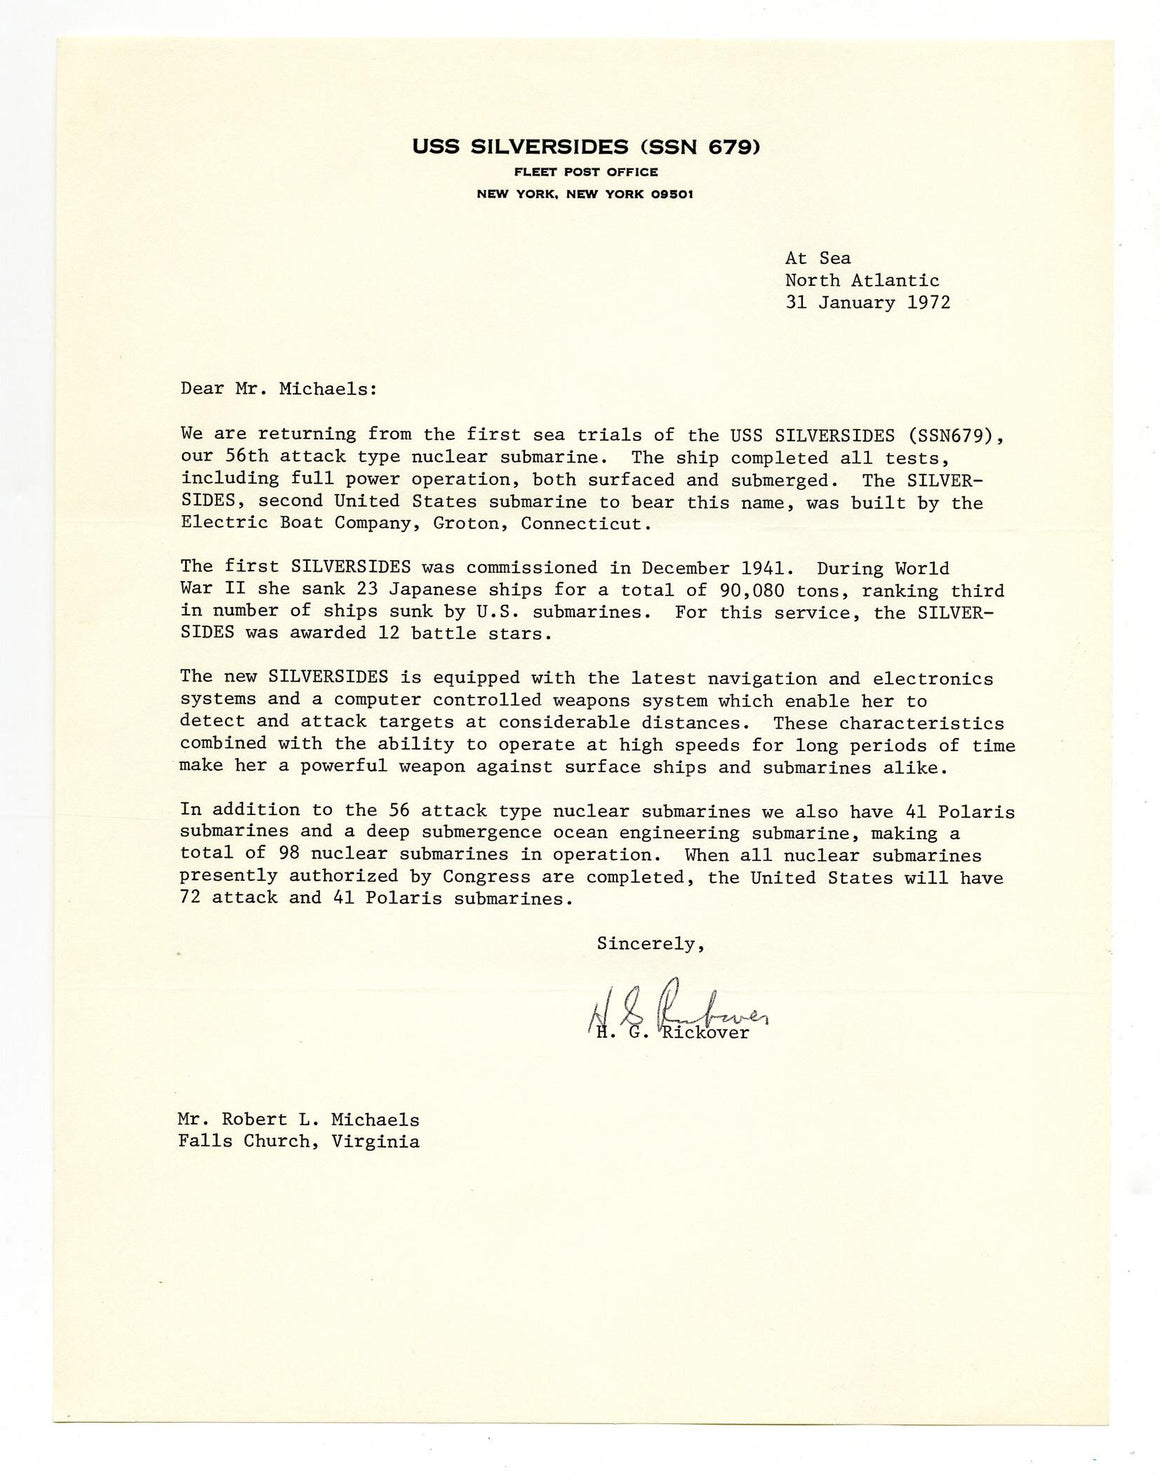 Hyman G. Rickover Signed Letter to Robert L. Michaels, 1972